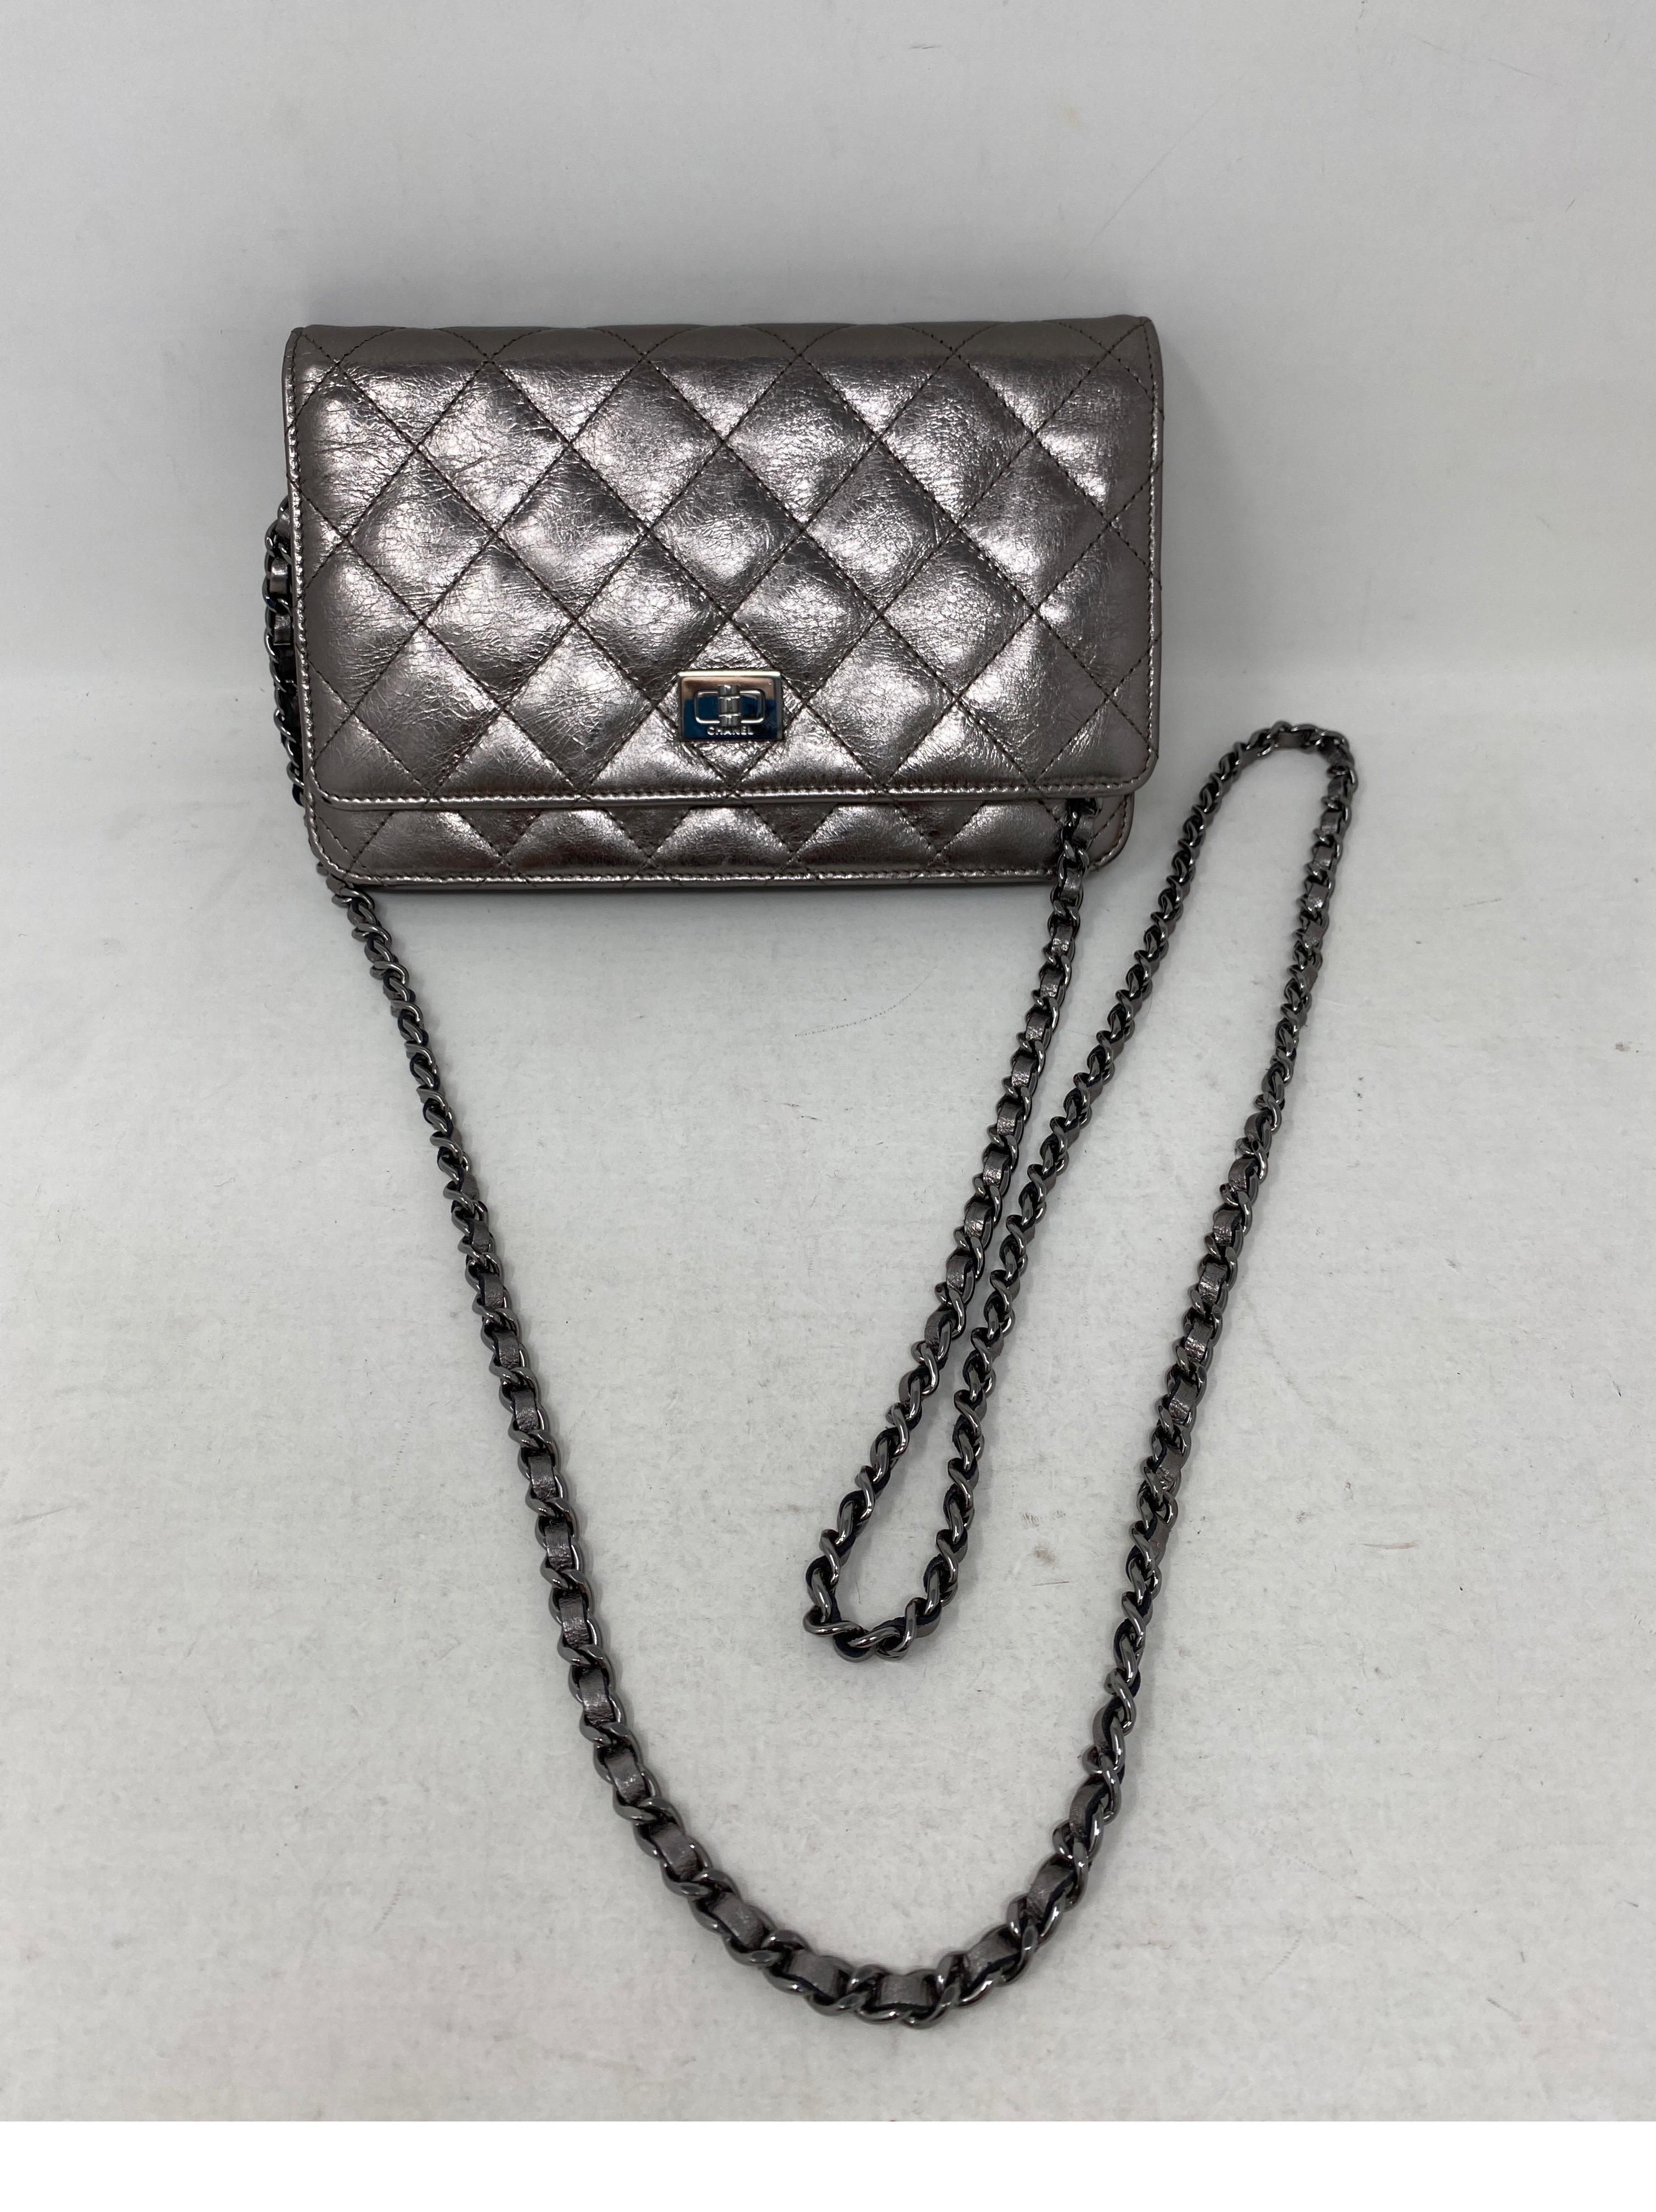 Chanel Silver Metallic Reissue Wallet On A Chain Bag 2